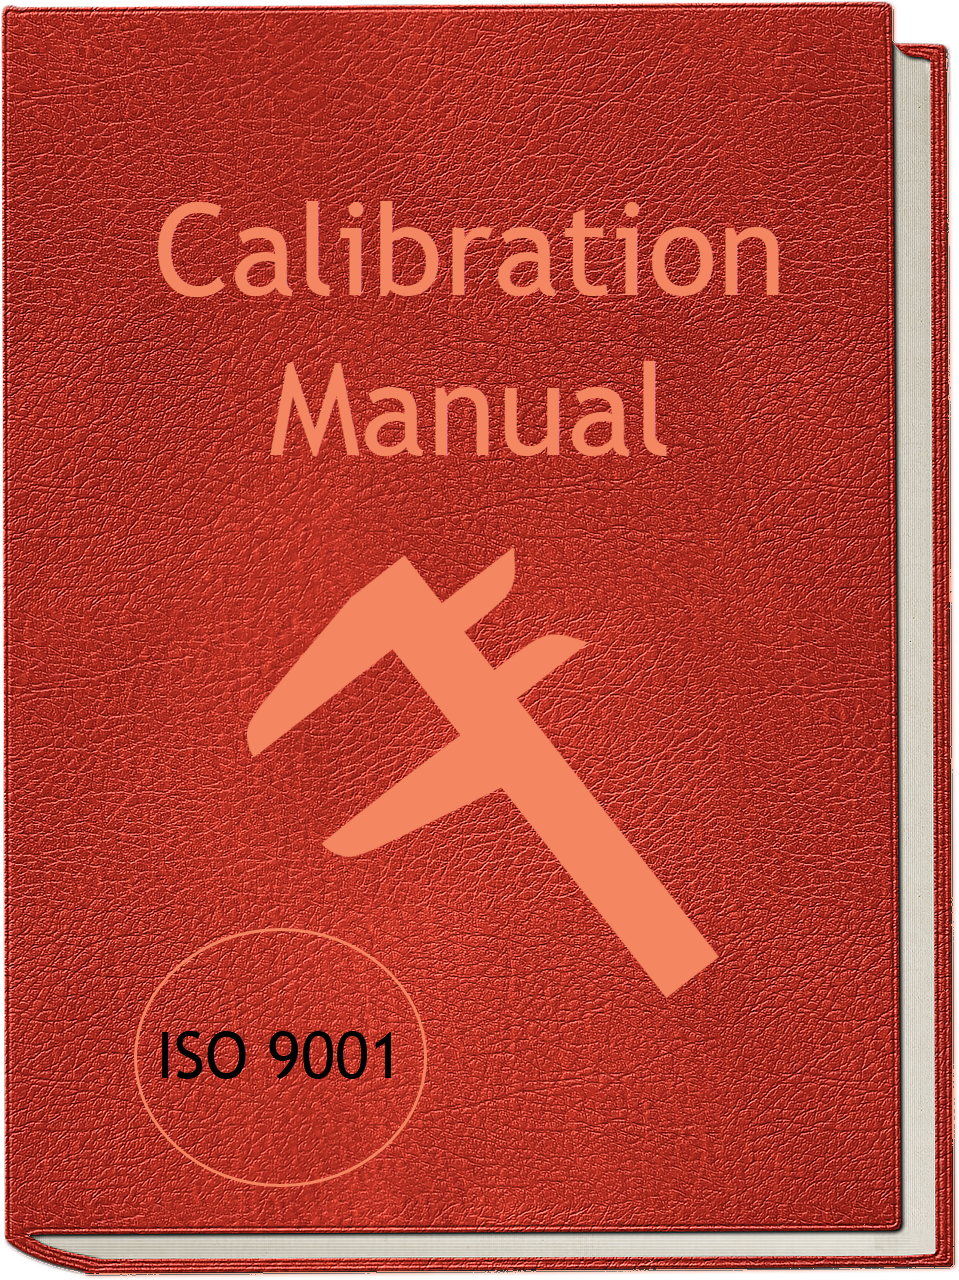 Download Today. Don’t forget important issues when setting up your calibration system. Avoid nasty audit issues. Use this calibration manual to create your calibration system. $49.00. Satisfaction guaranteed.